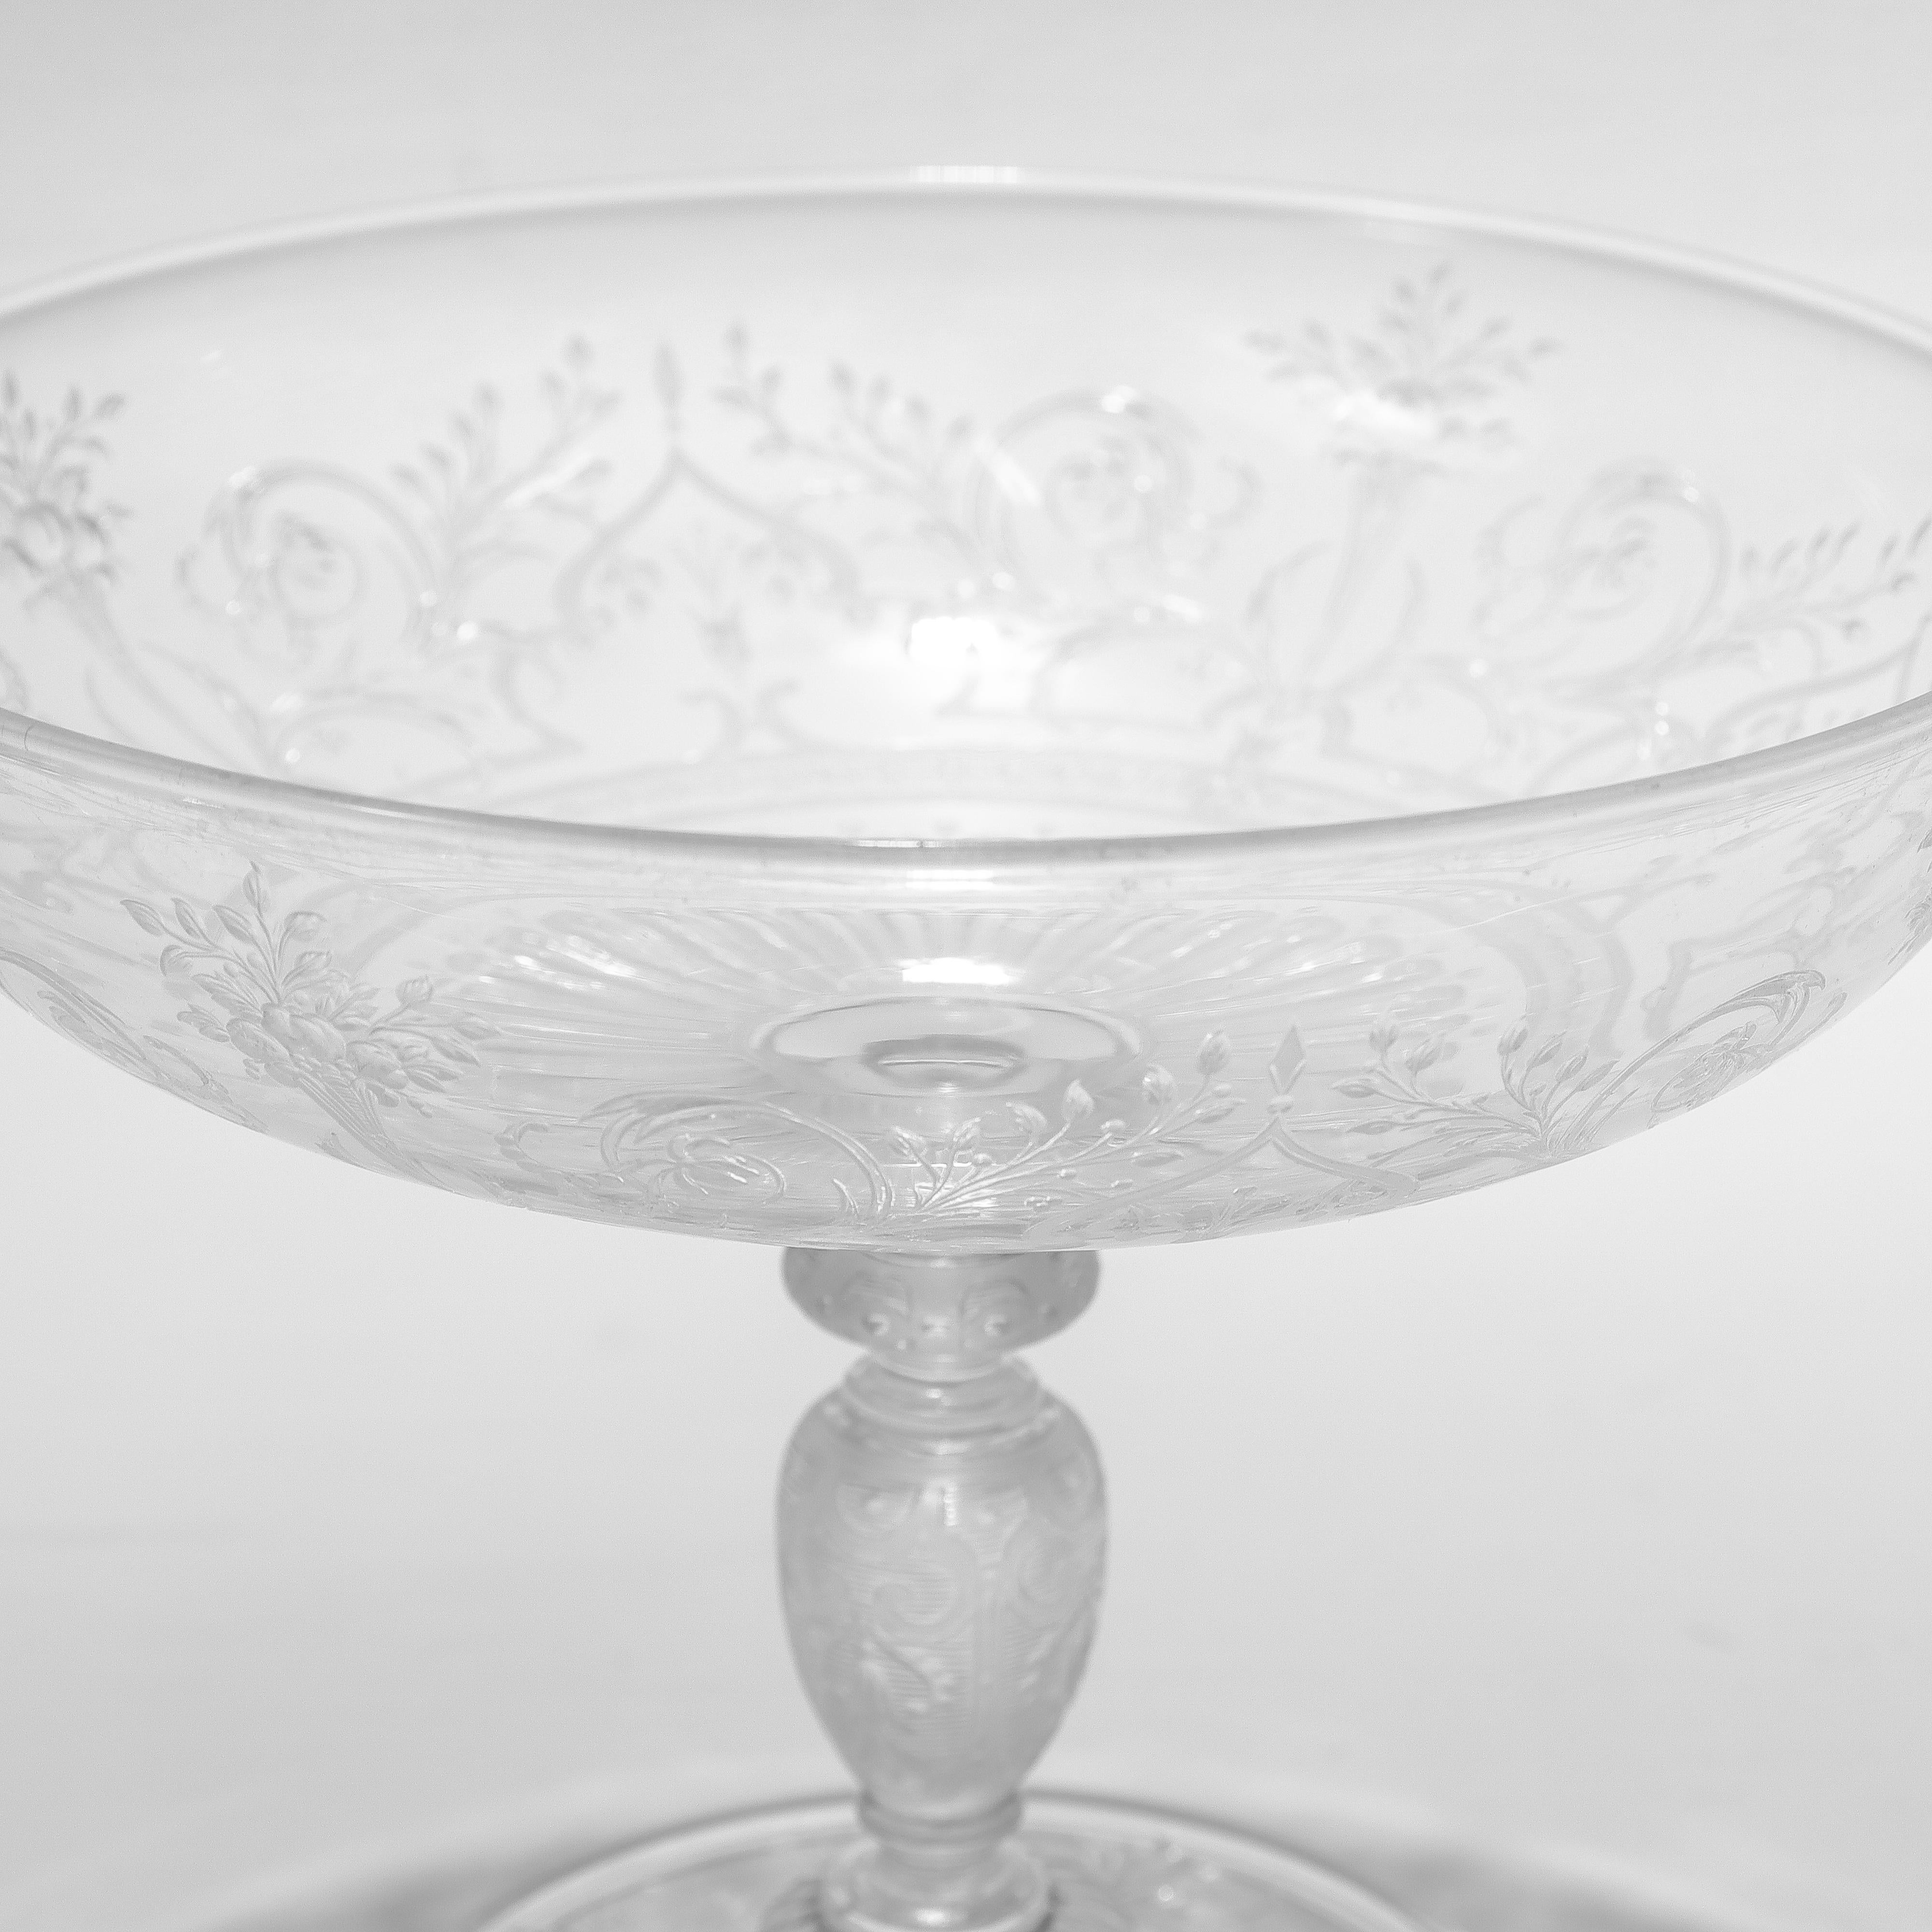 Antique Stourbridge Etched & Engraved Glass Lidded Compote or Tazza For Sale 5